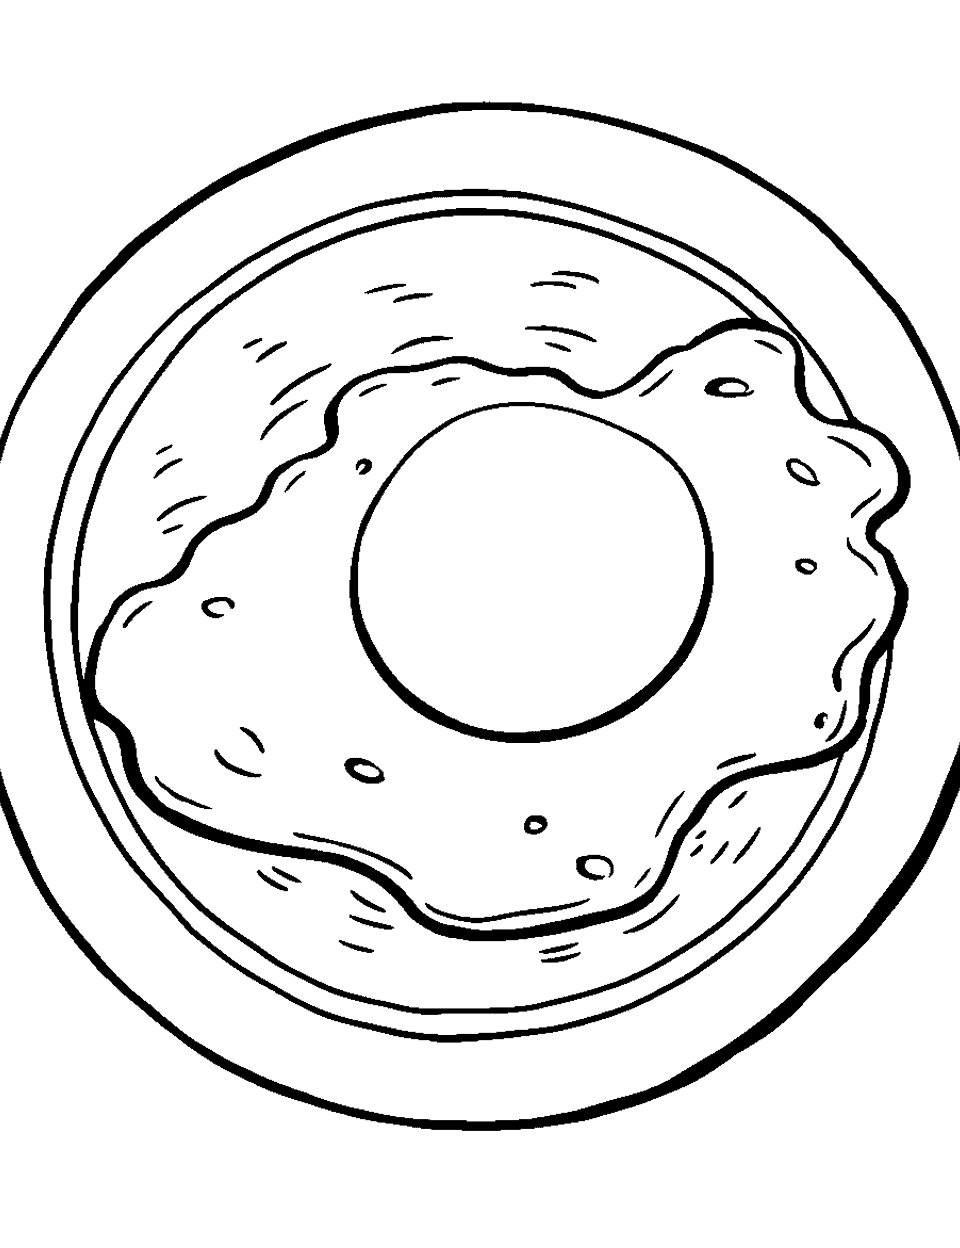 Breakfast Sunny Side Food Coloring Page - A sunny-side-up egg on a plate.